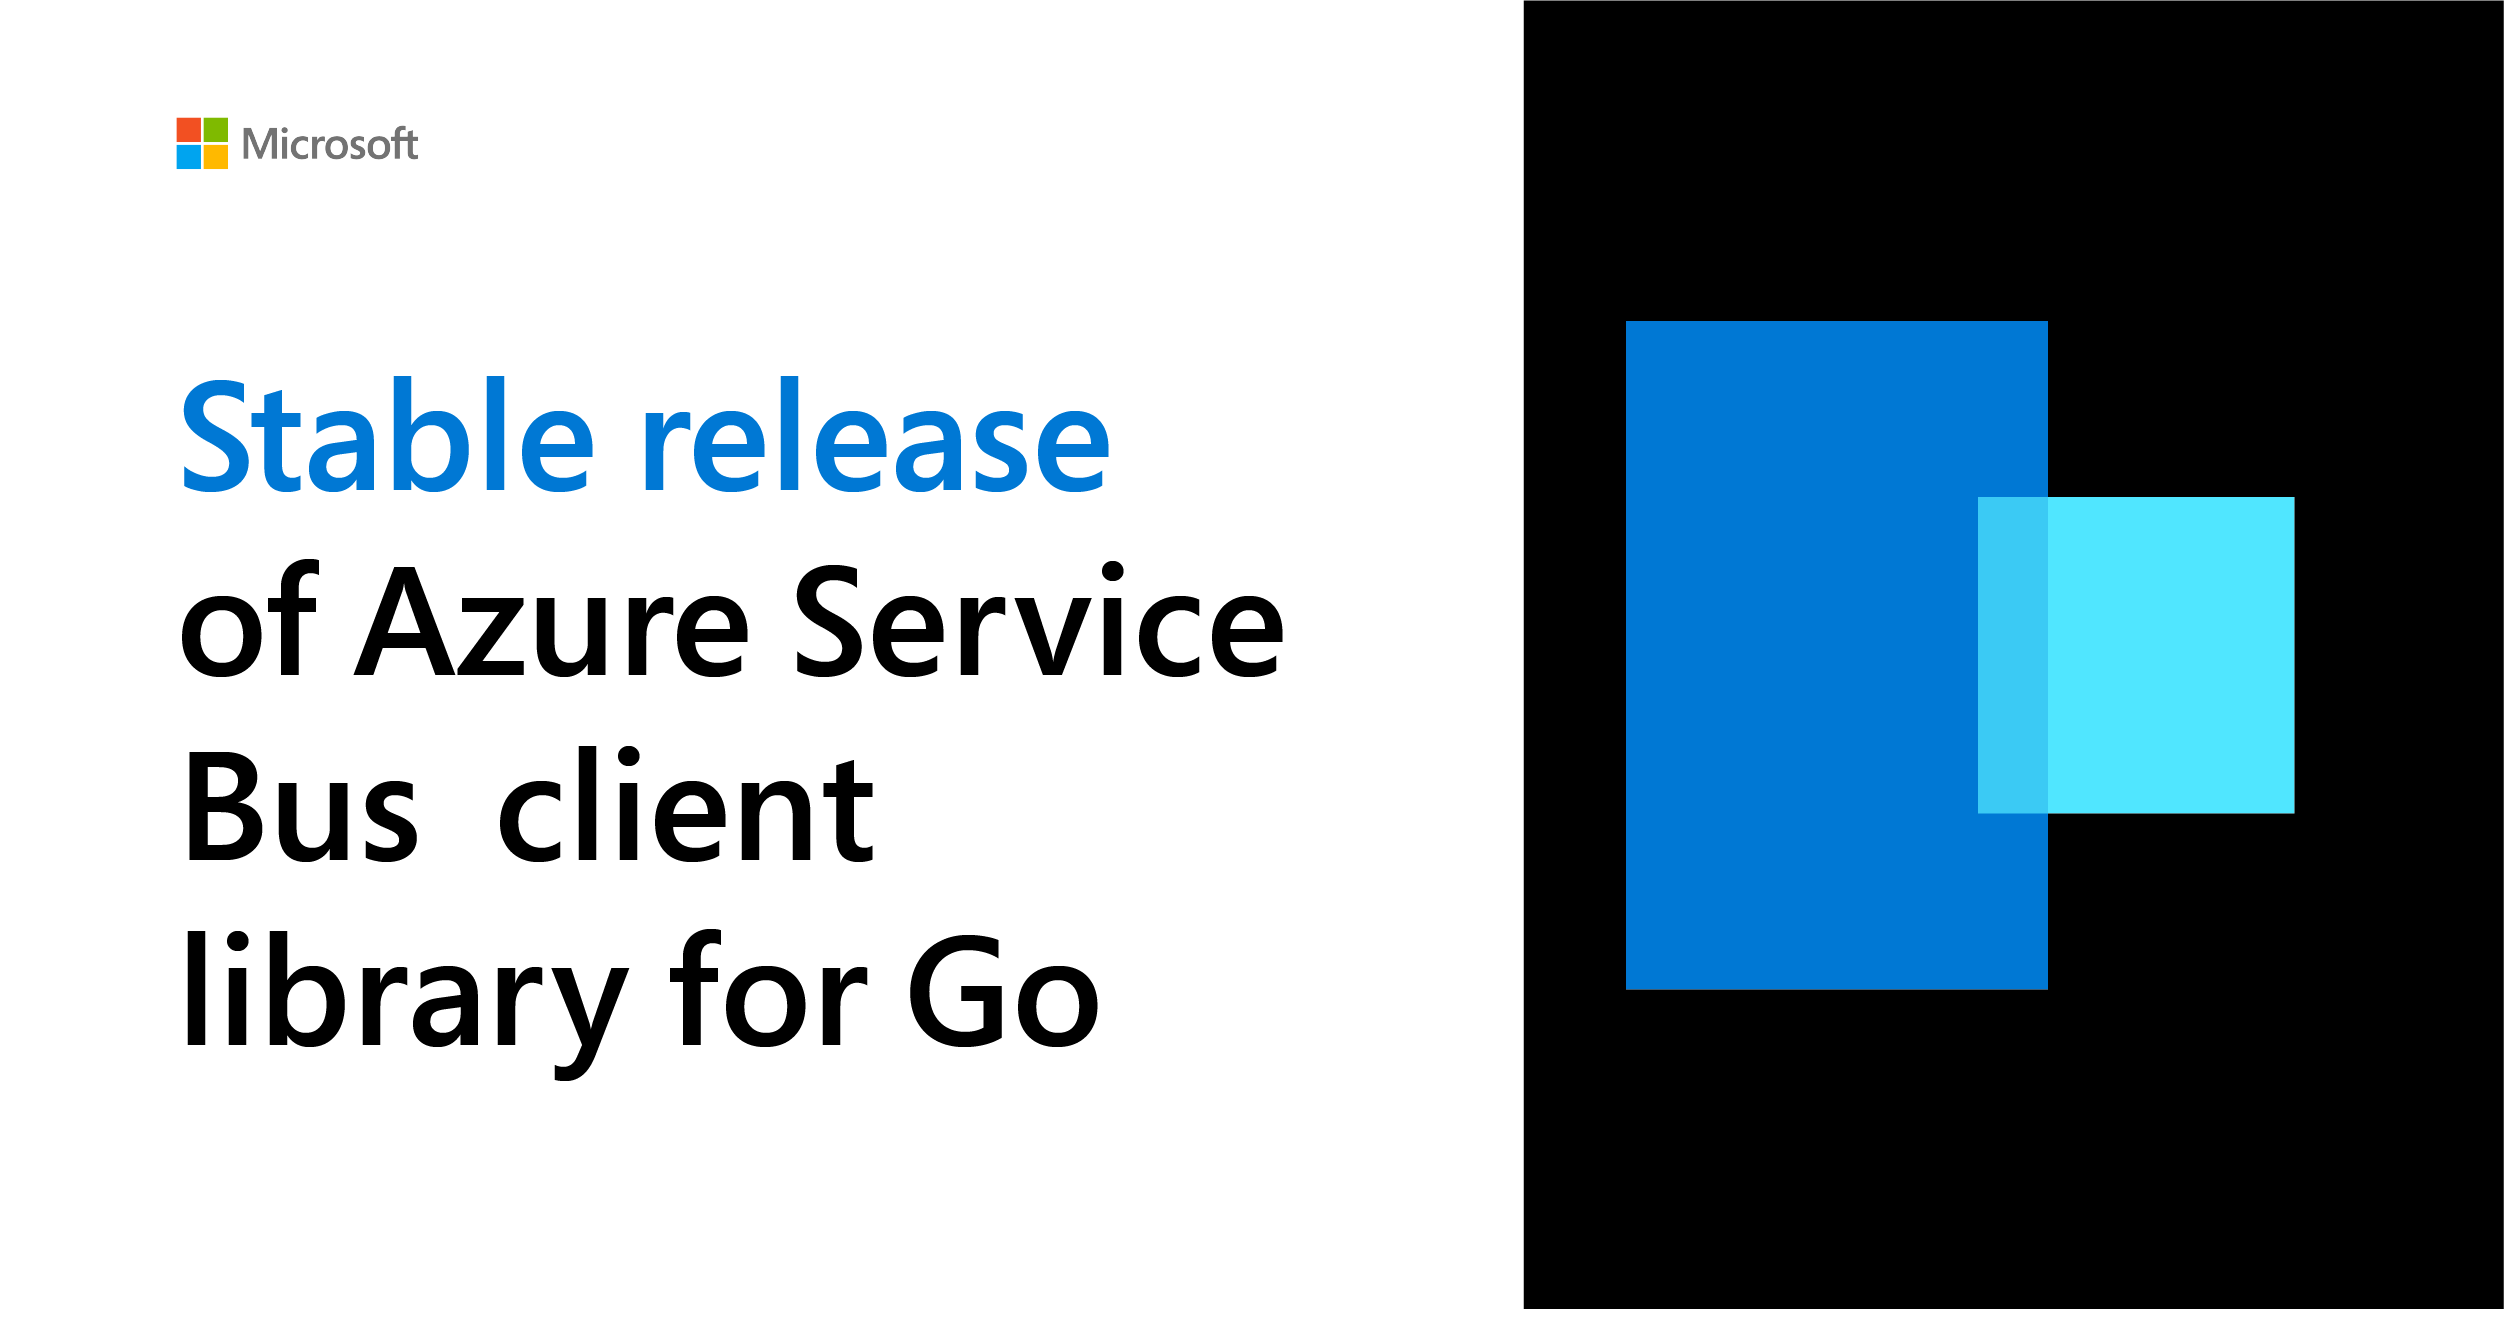 Announcing the stable release of the Azure Service Bus client library ... image